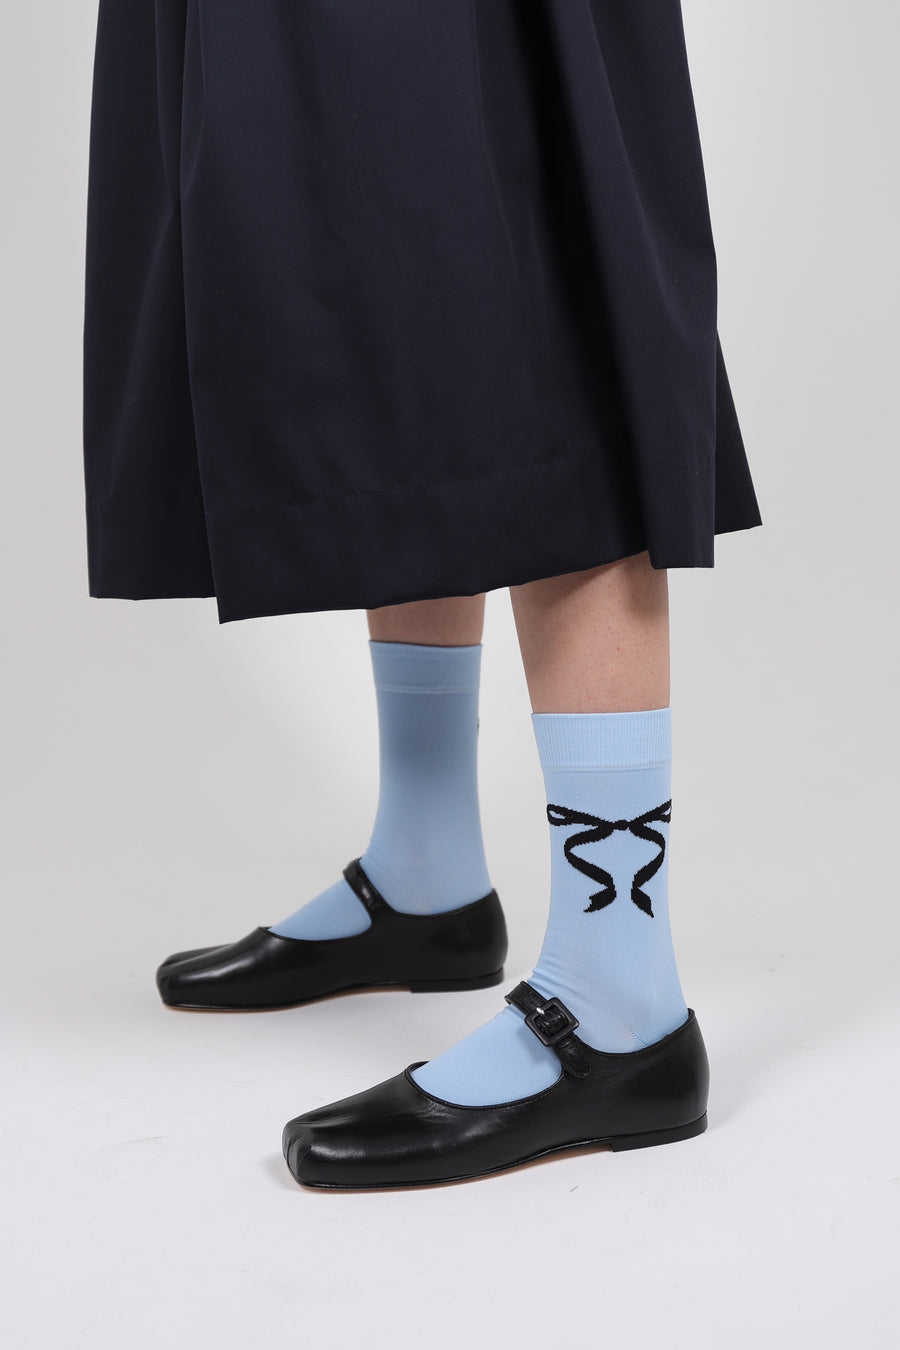 Baby blue crew length socks with black bows on either sides on model